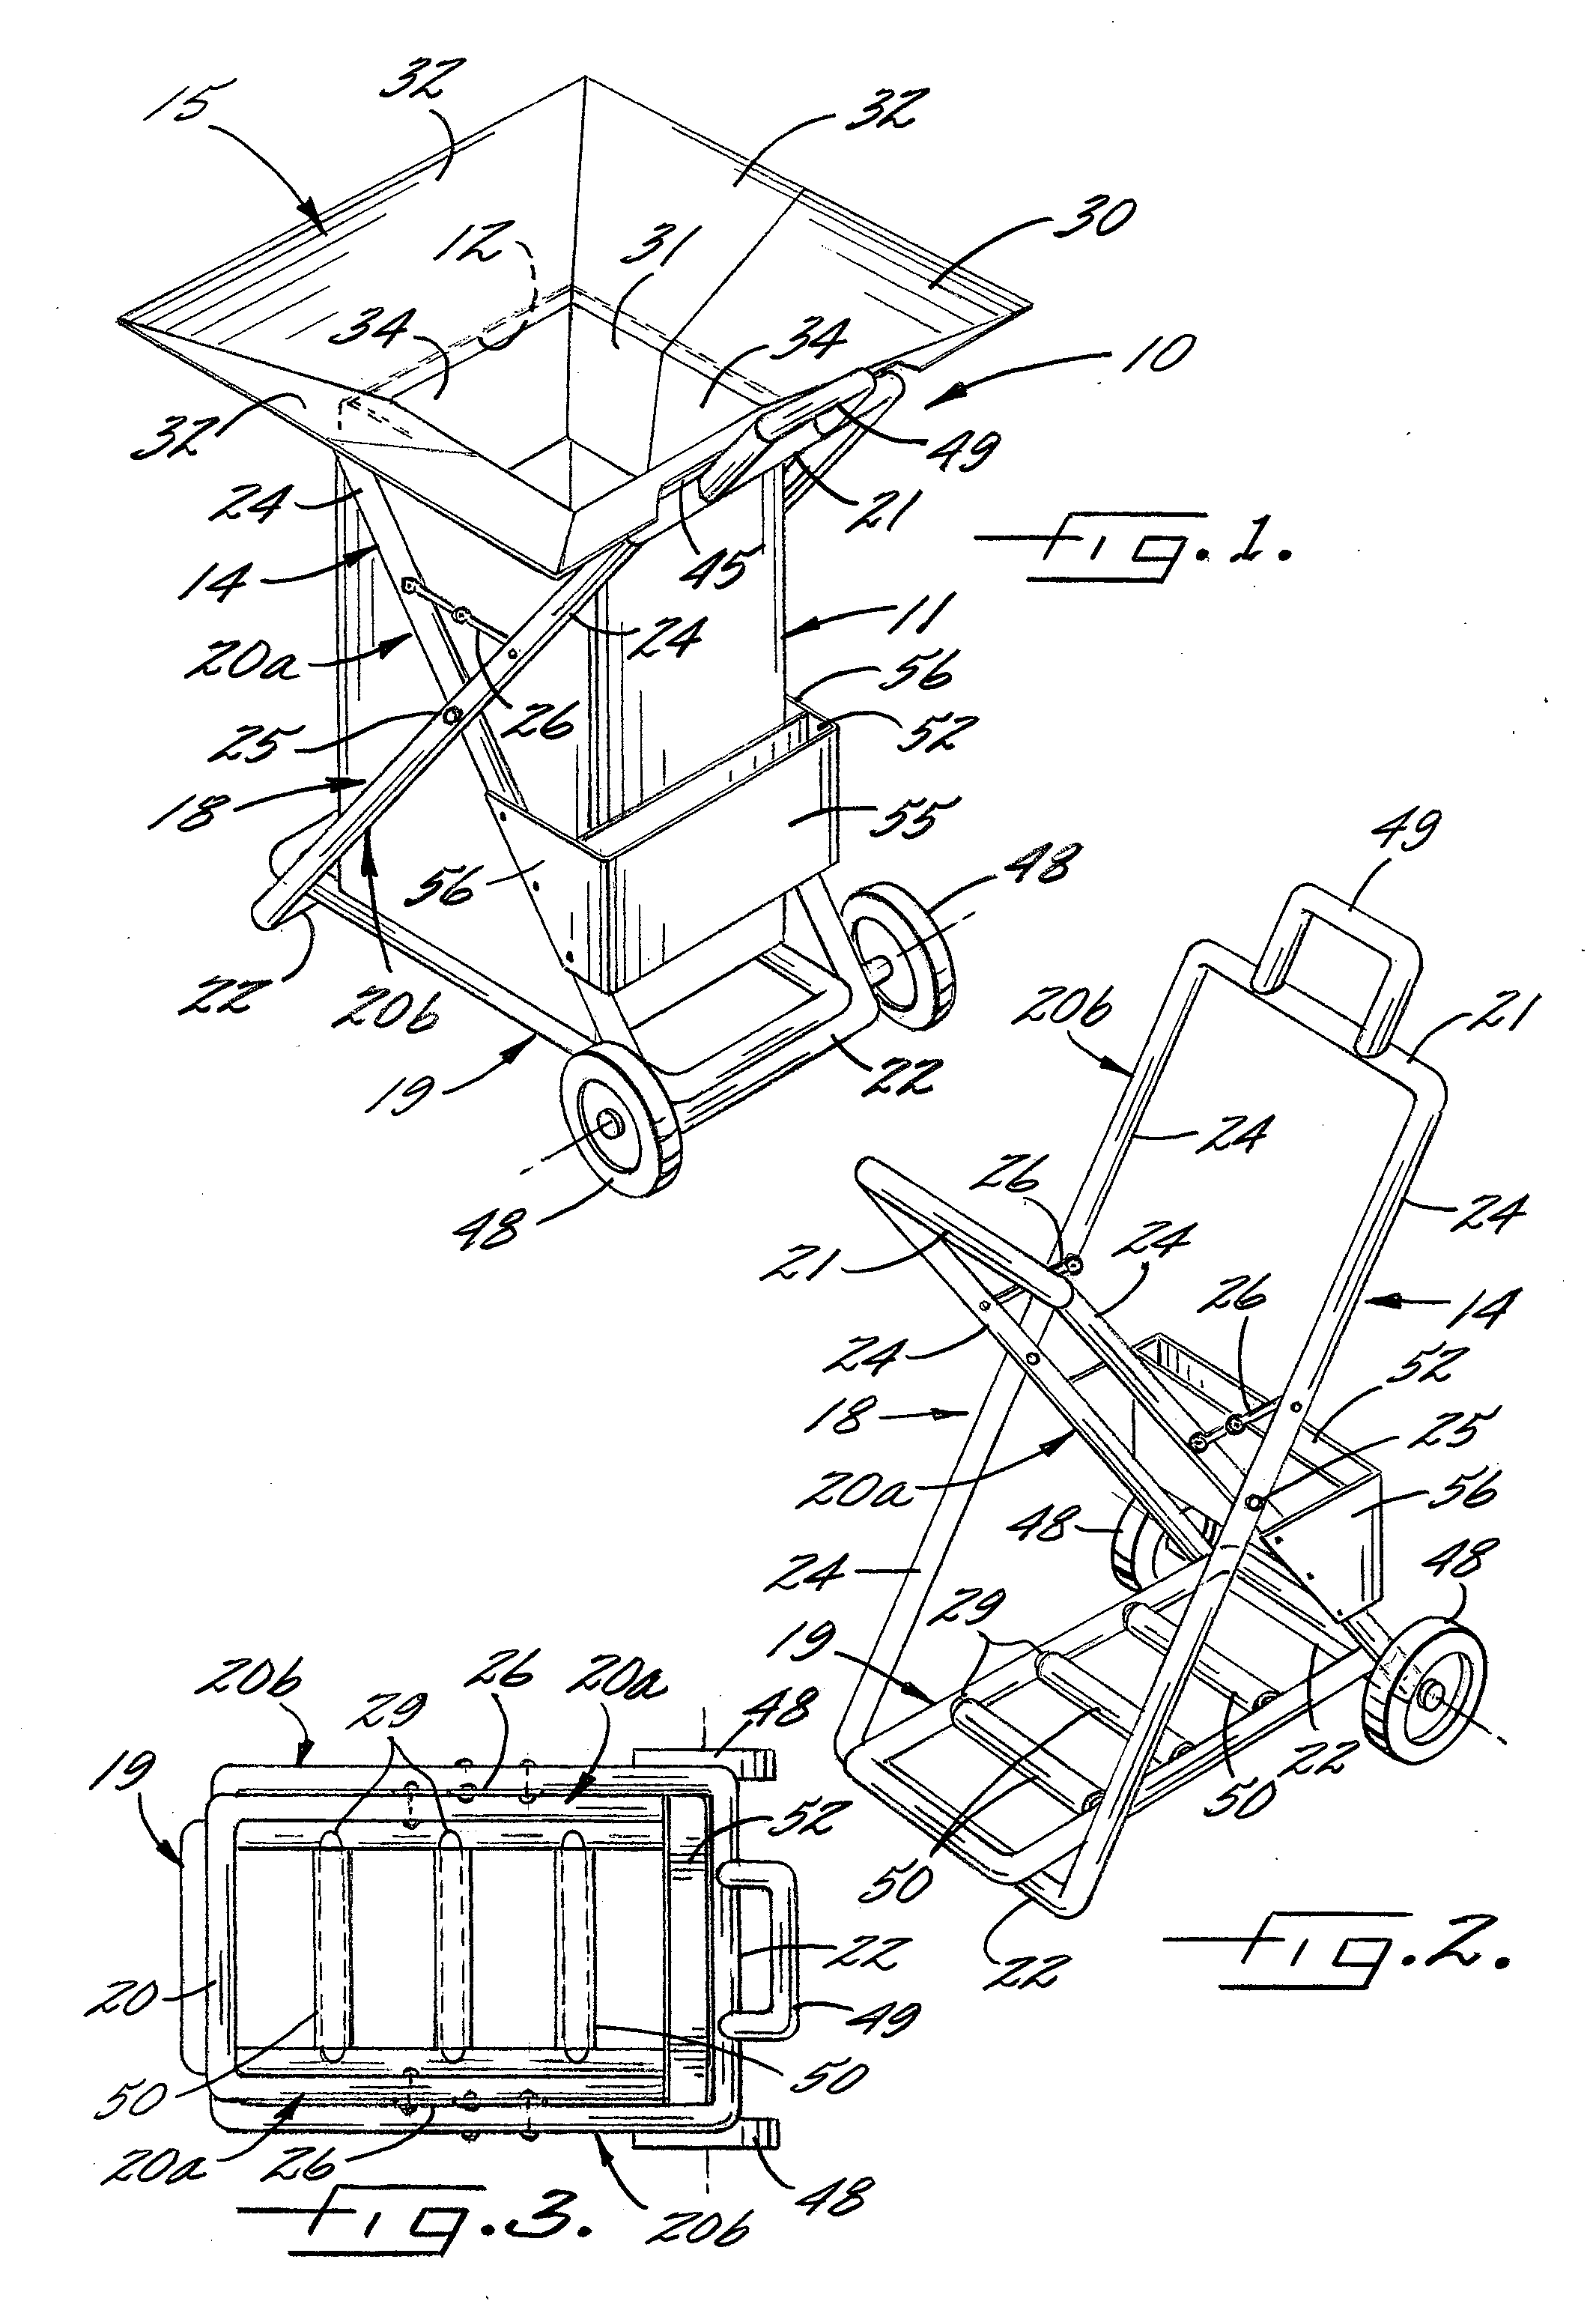 Apparatus and method for filling paper lawn refuse bags